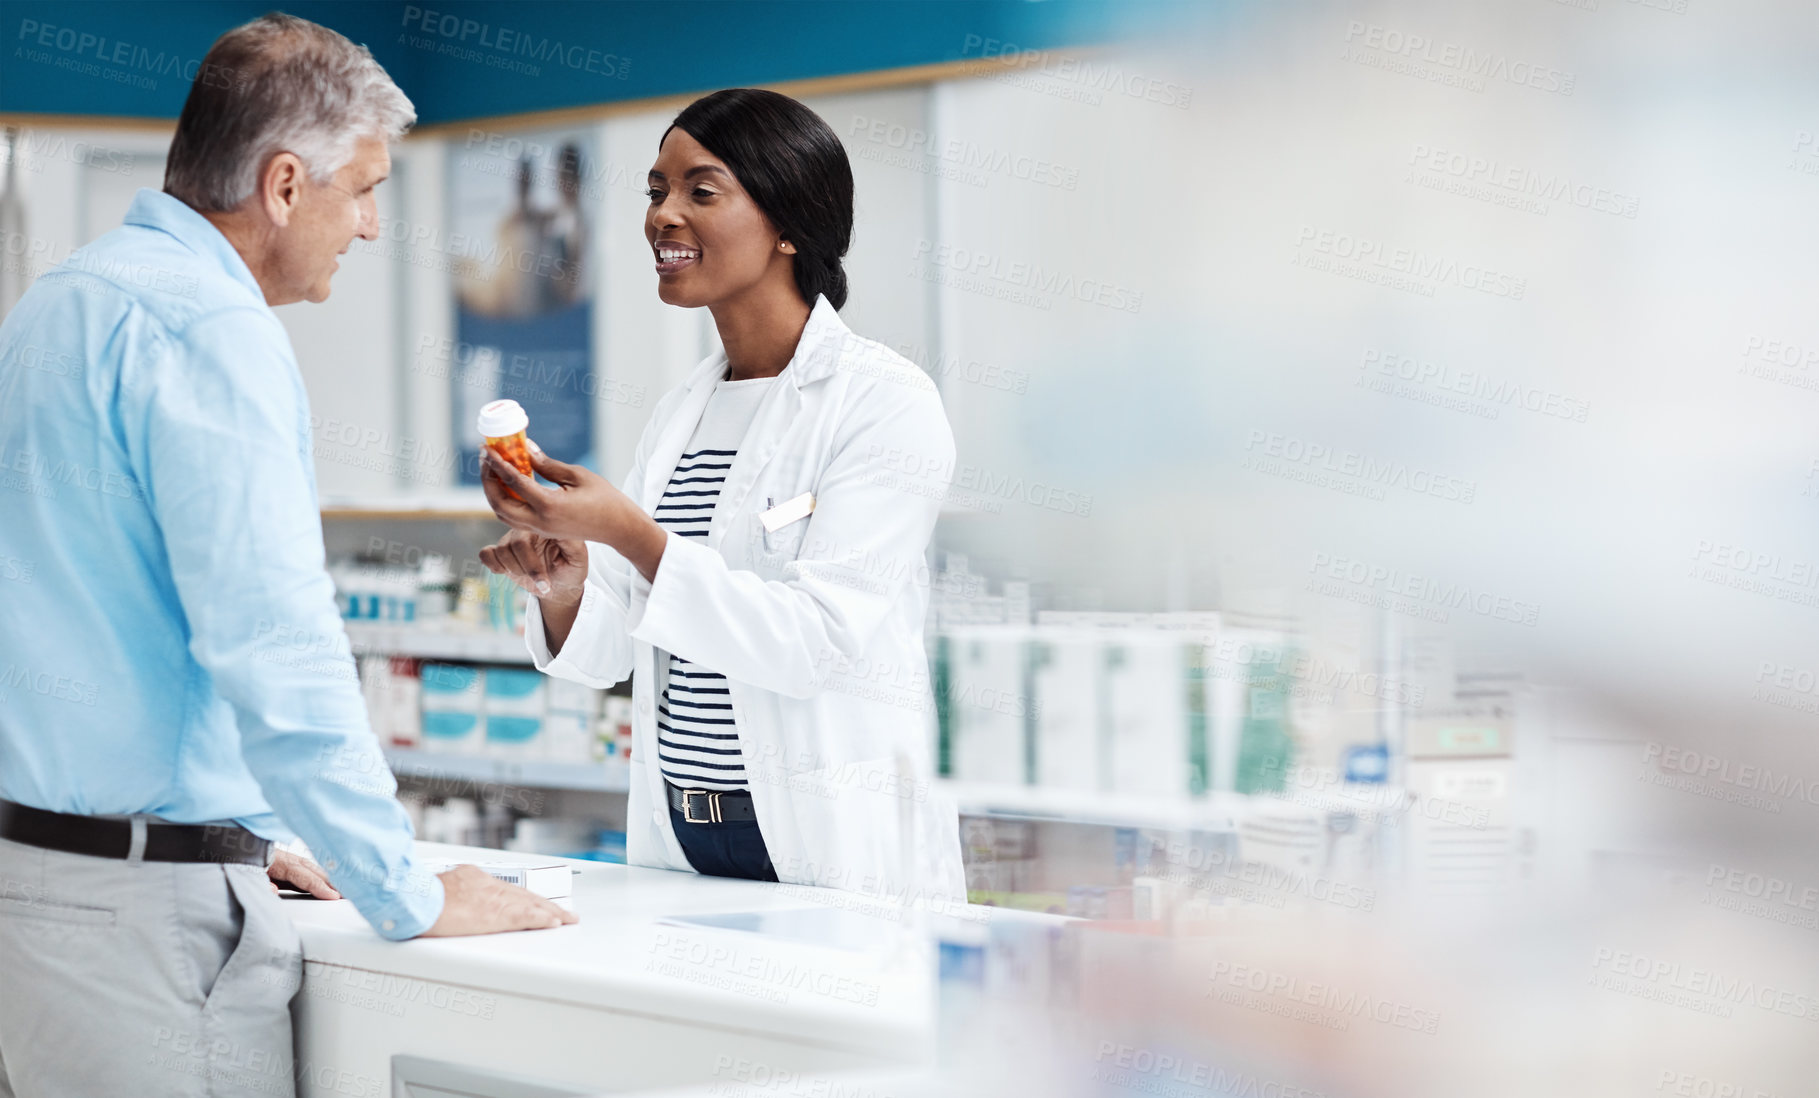 Buy stock photo Shot of a female pharmacist assisting a customer in a drugstore